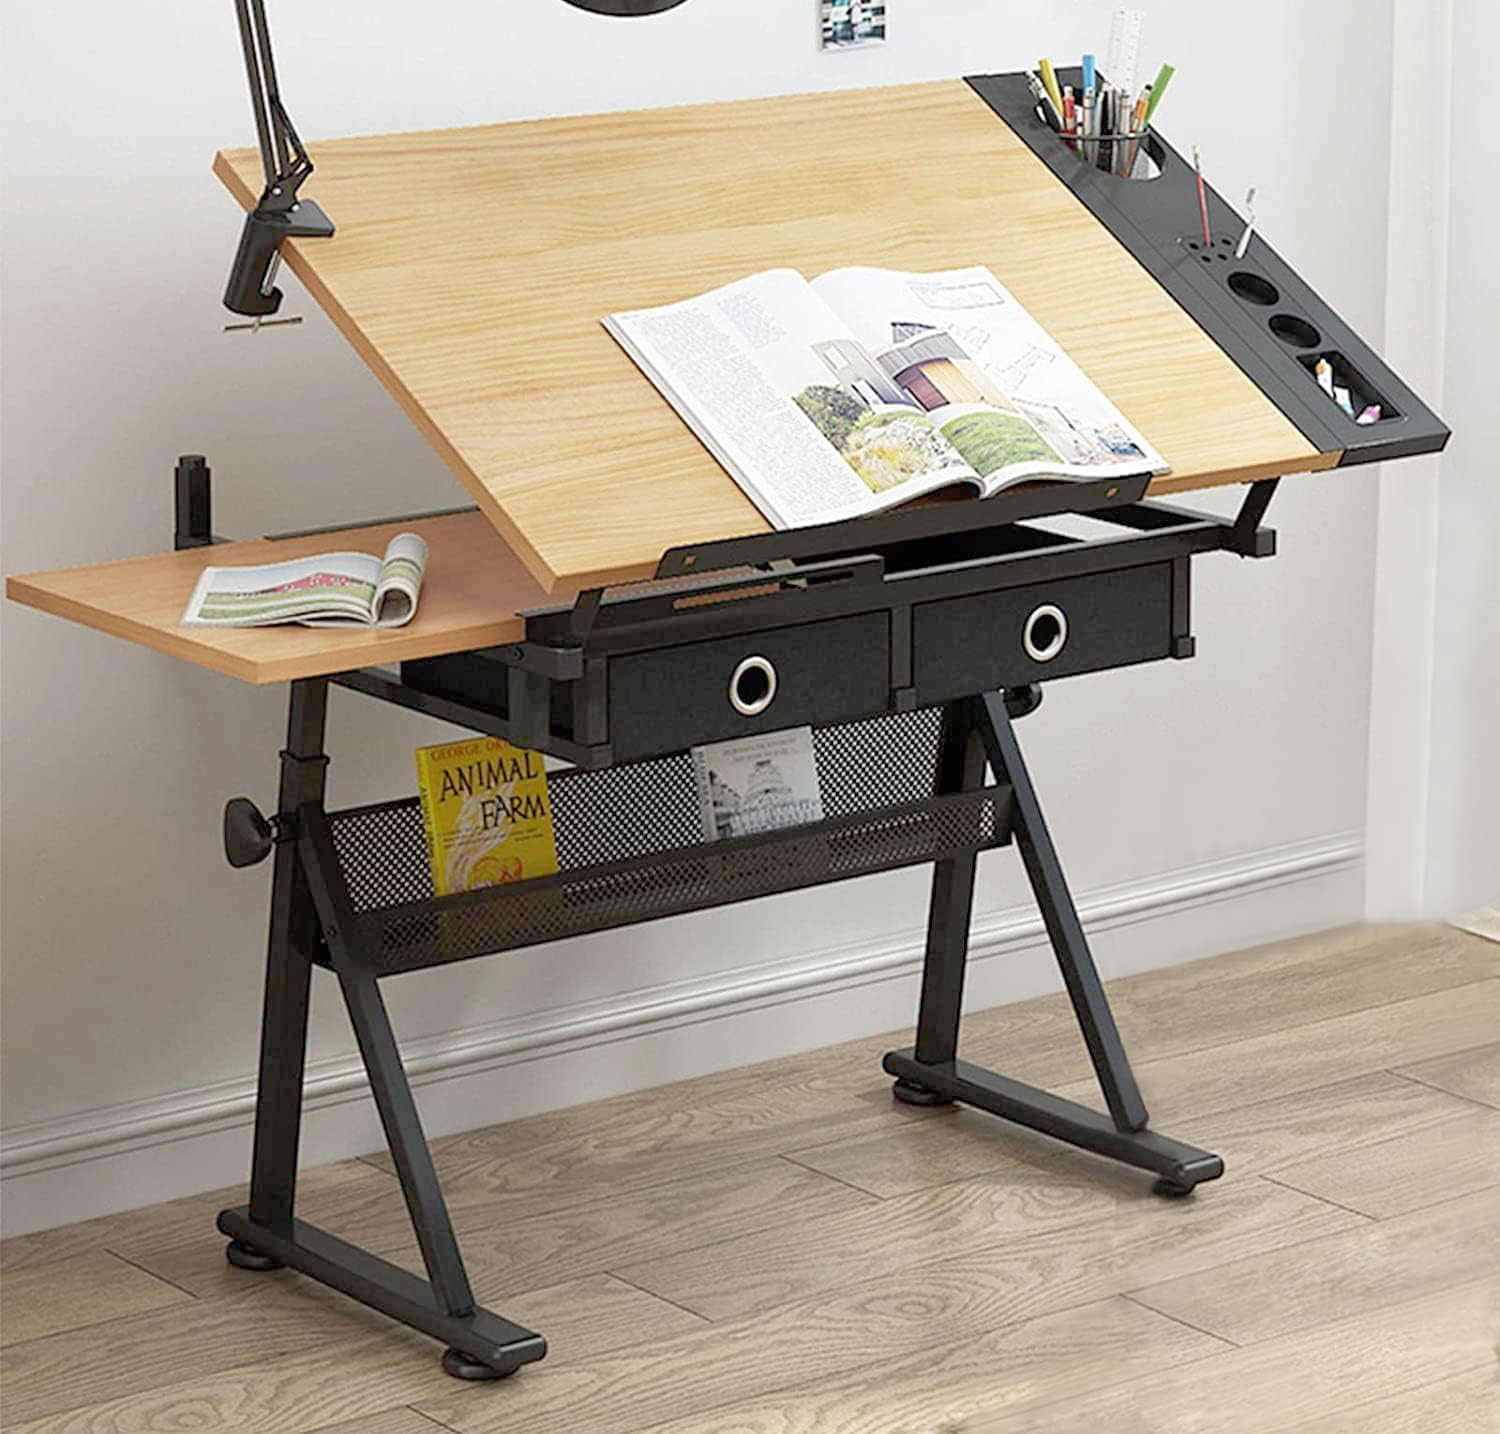 Drafting Tables